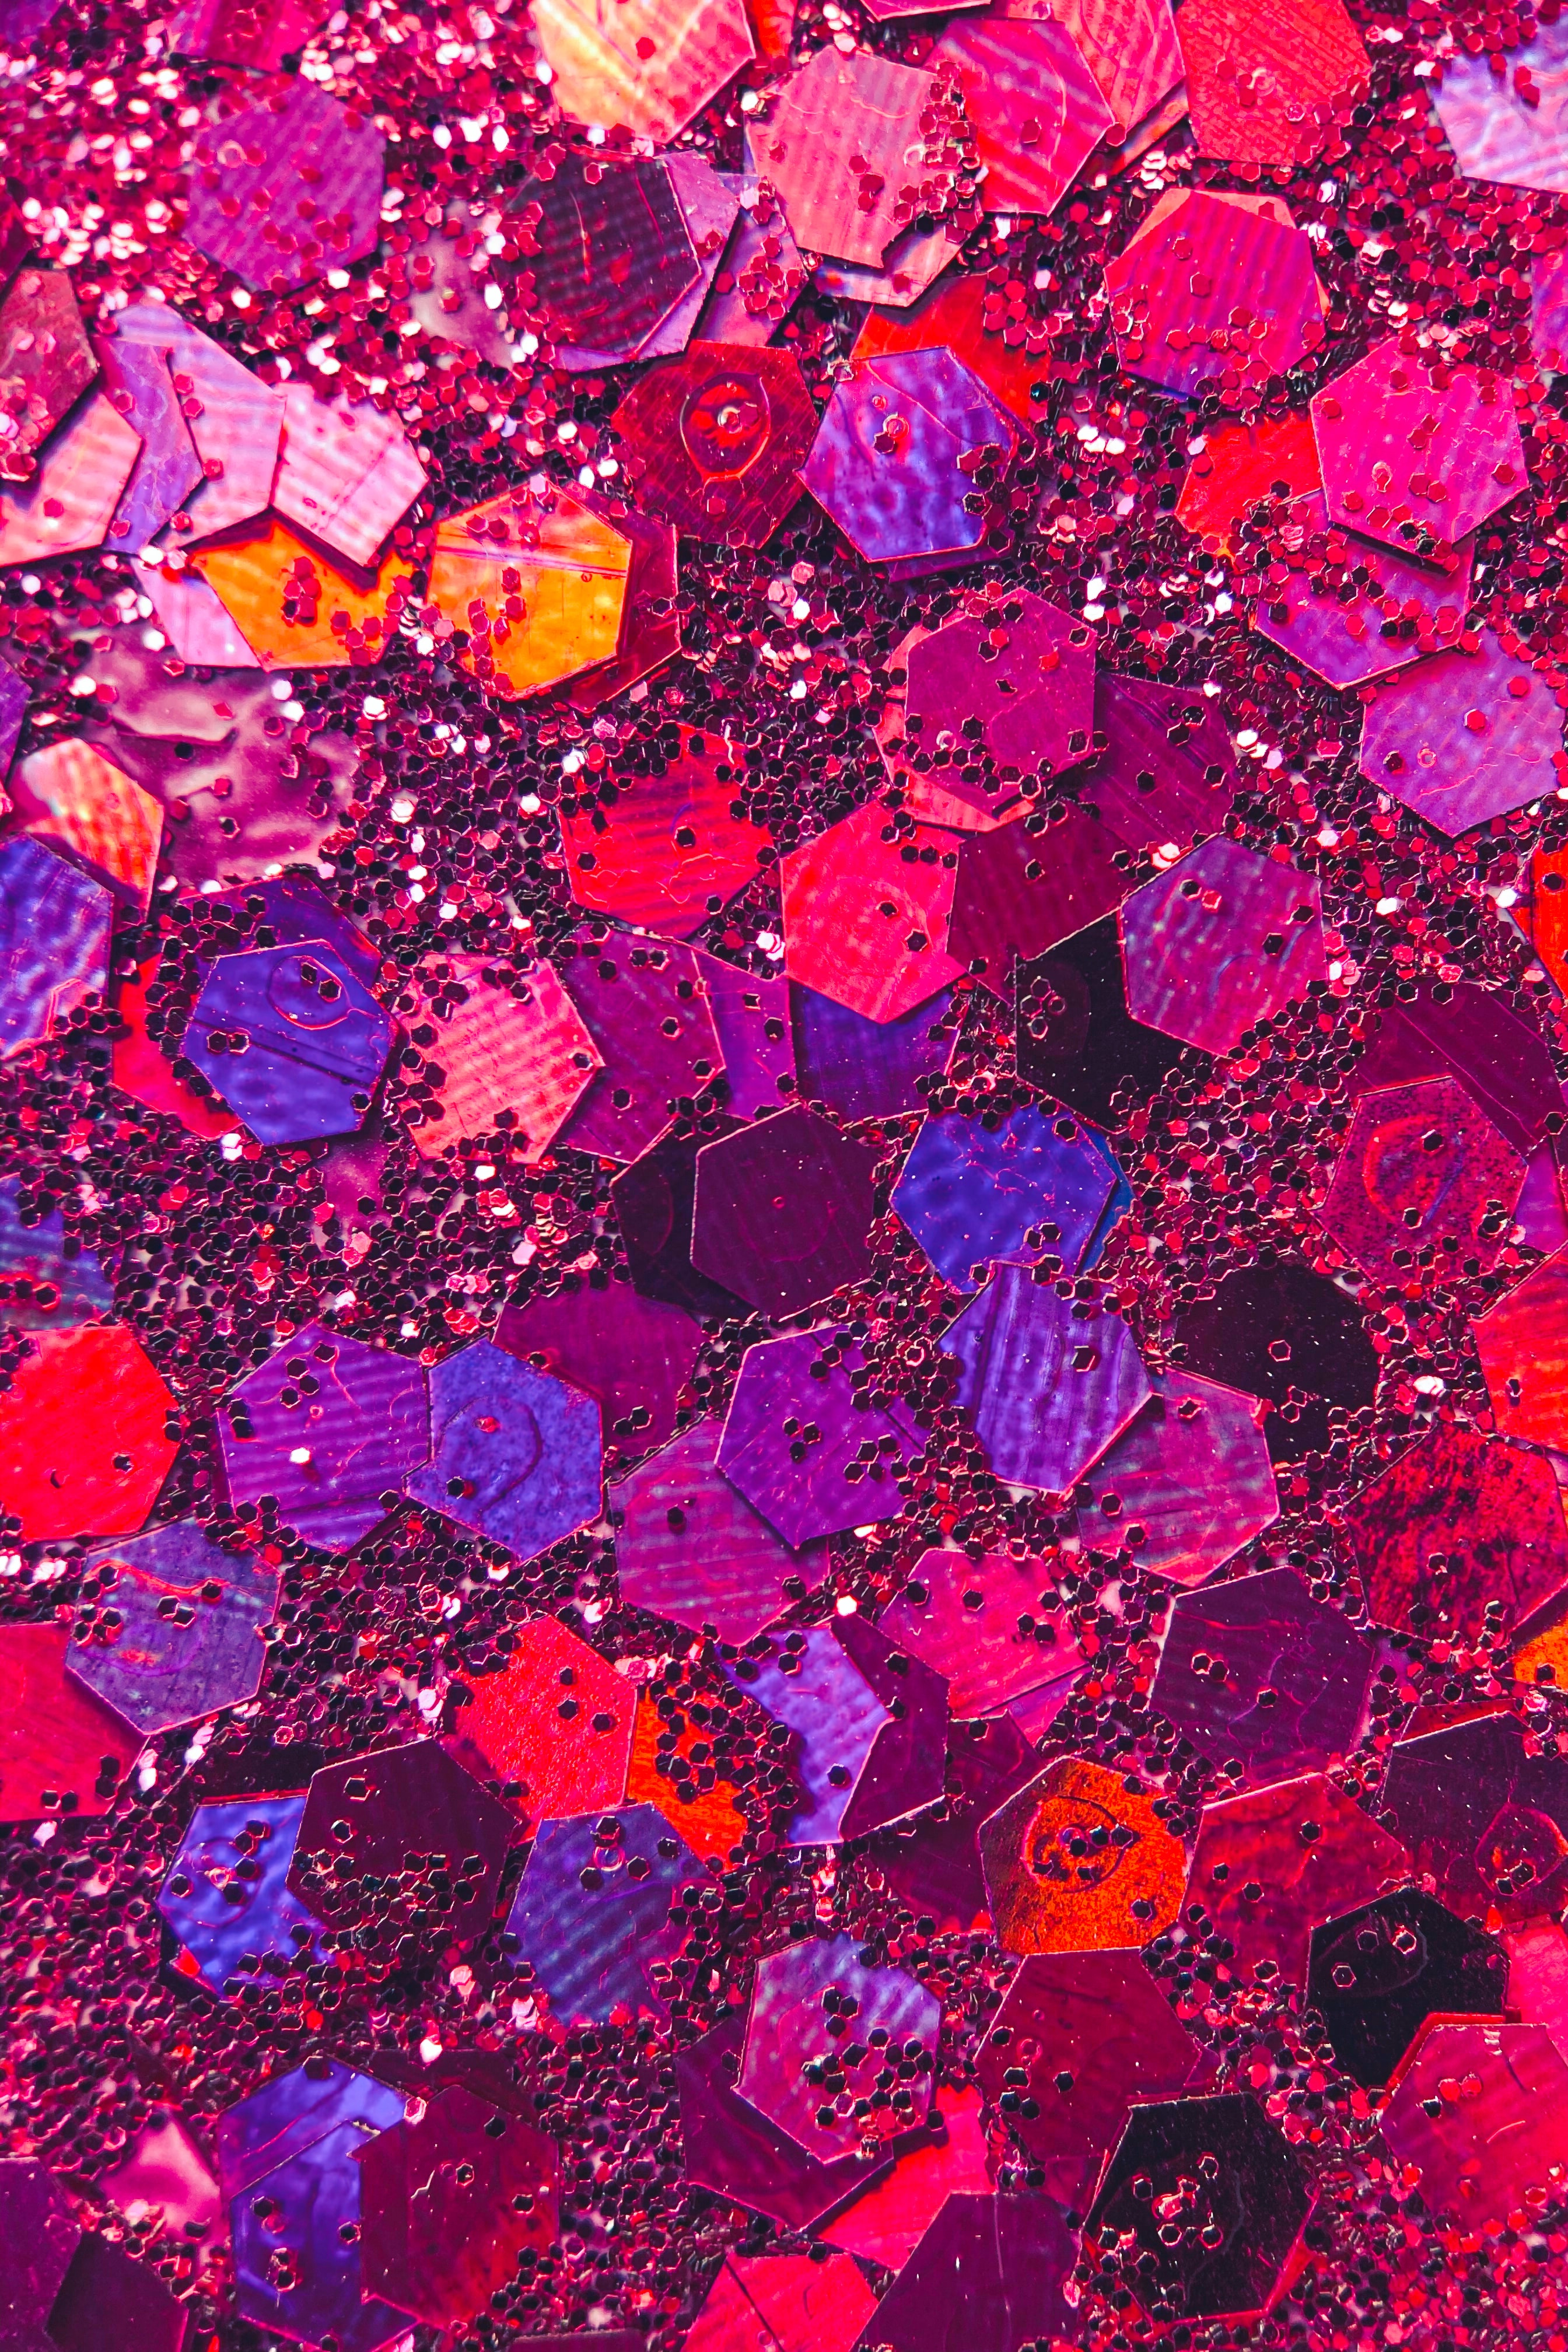 4K, FHD, UHD sequins, pink, glare, abstract